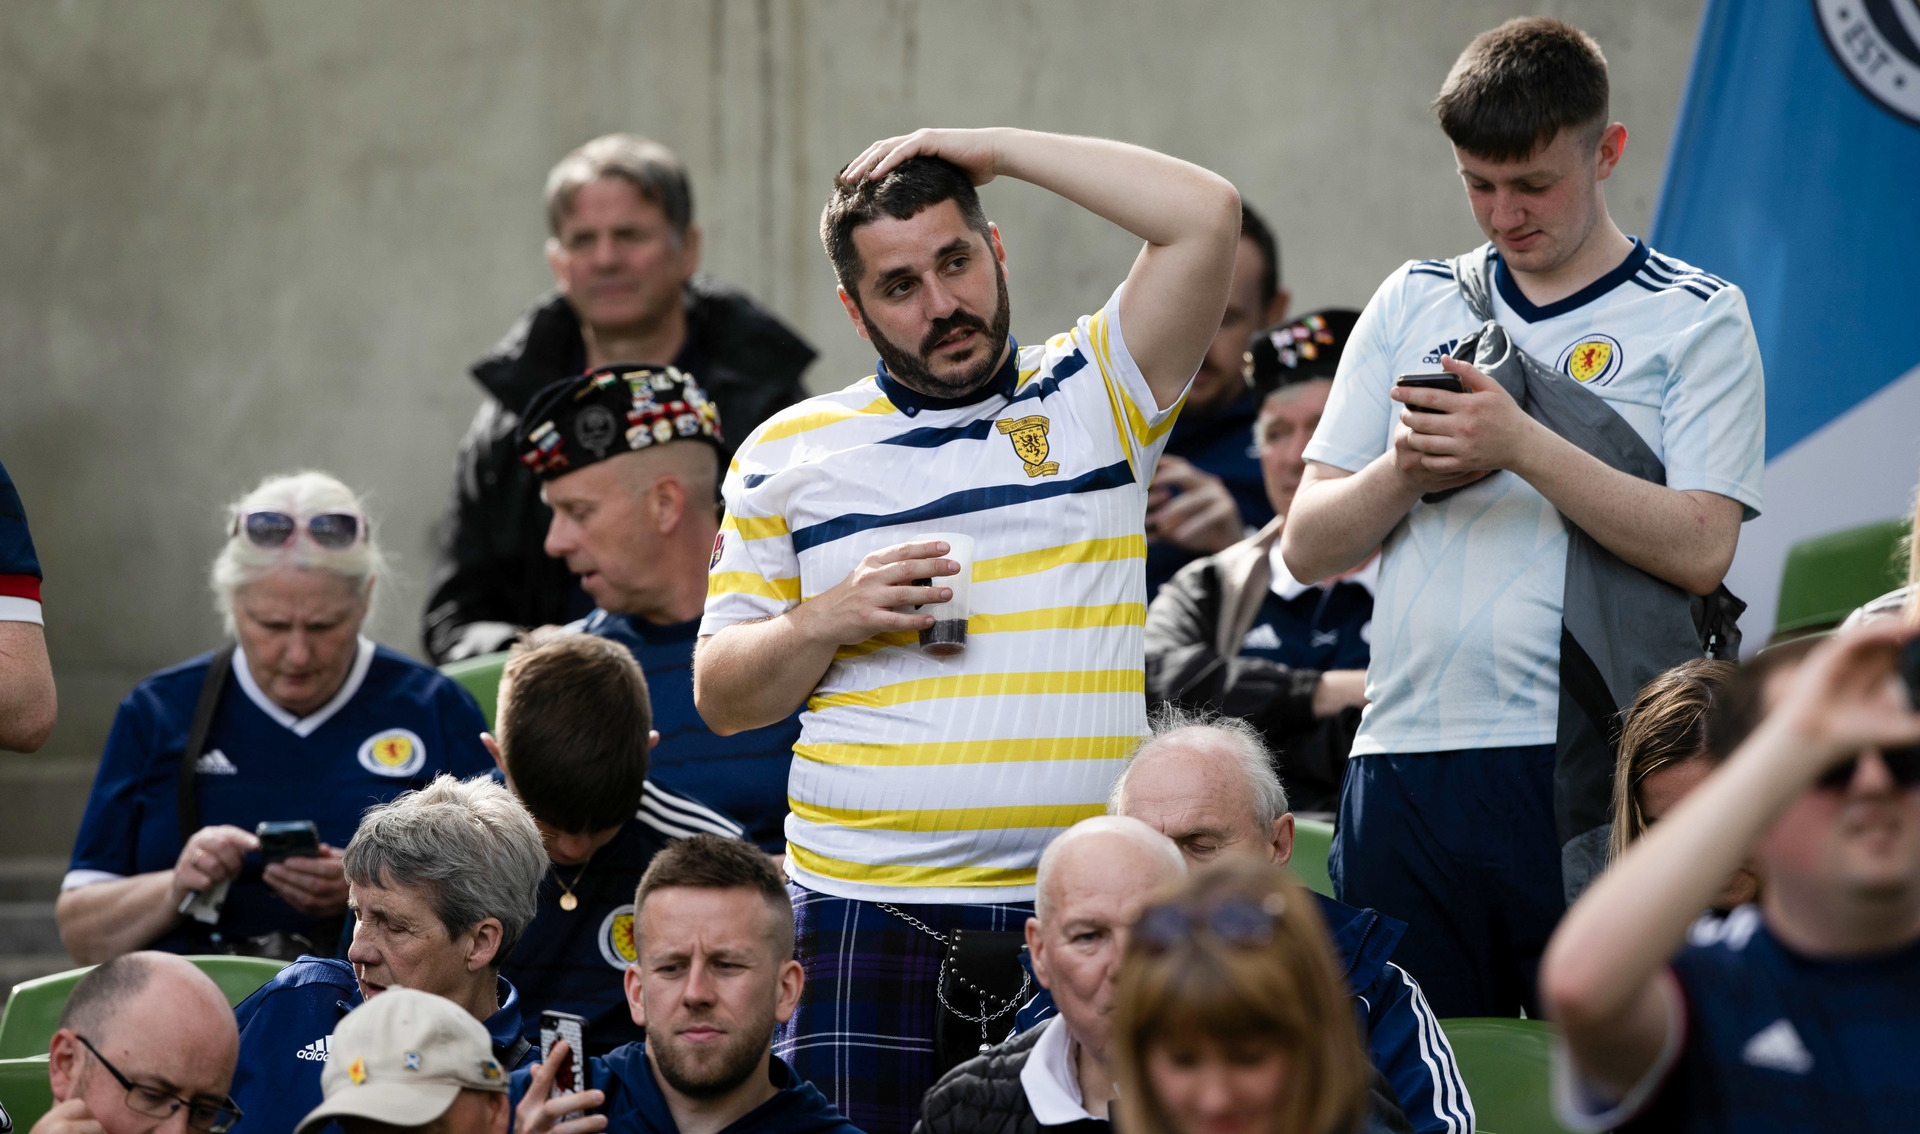 The Tartan Army could barely believe what they were watching.